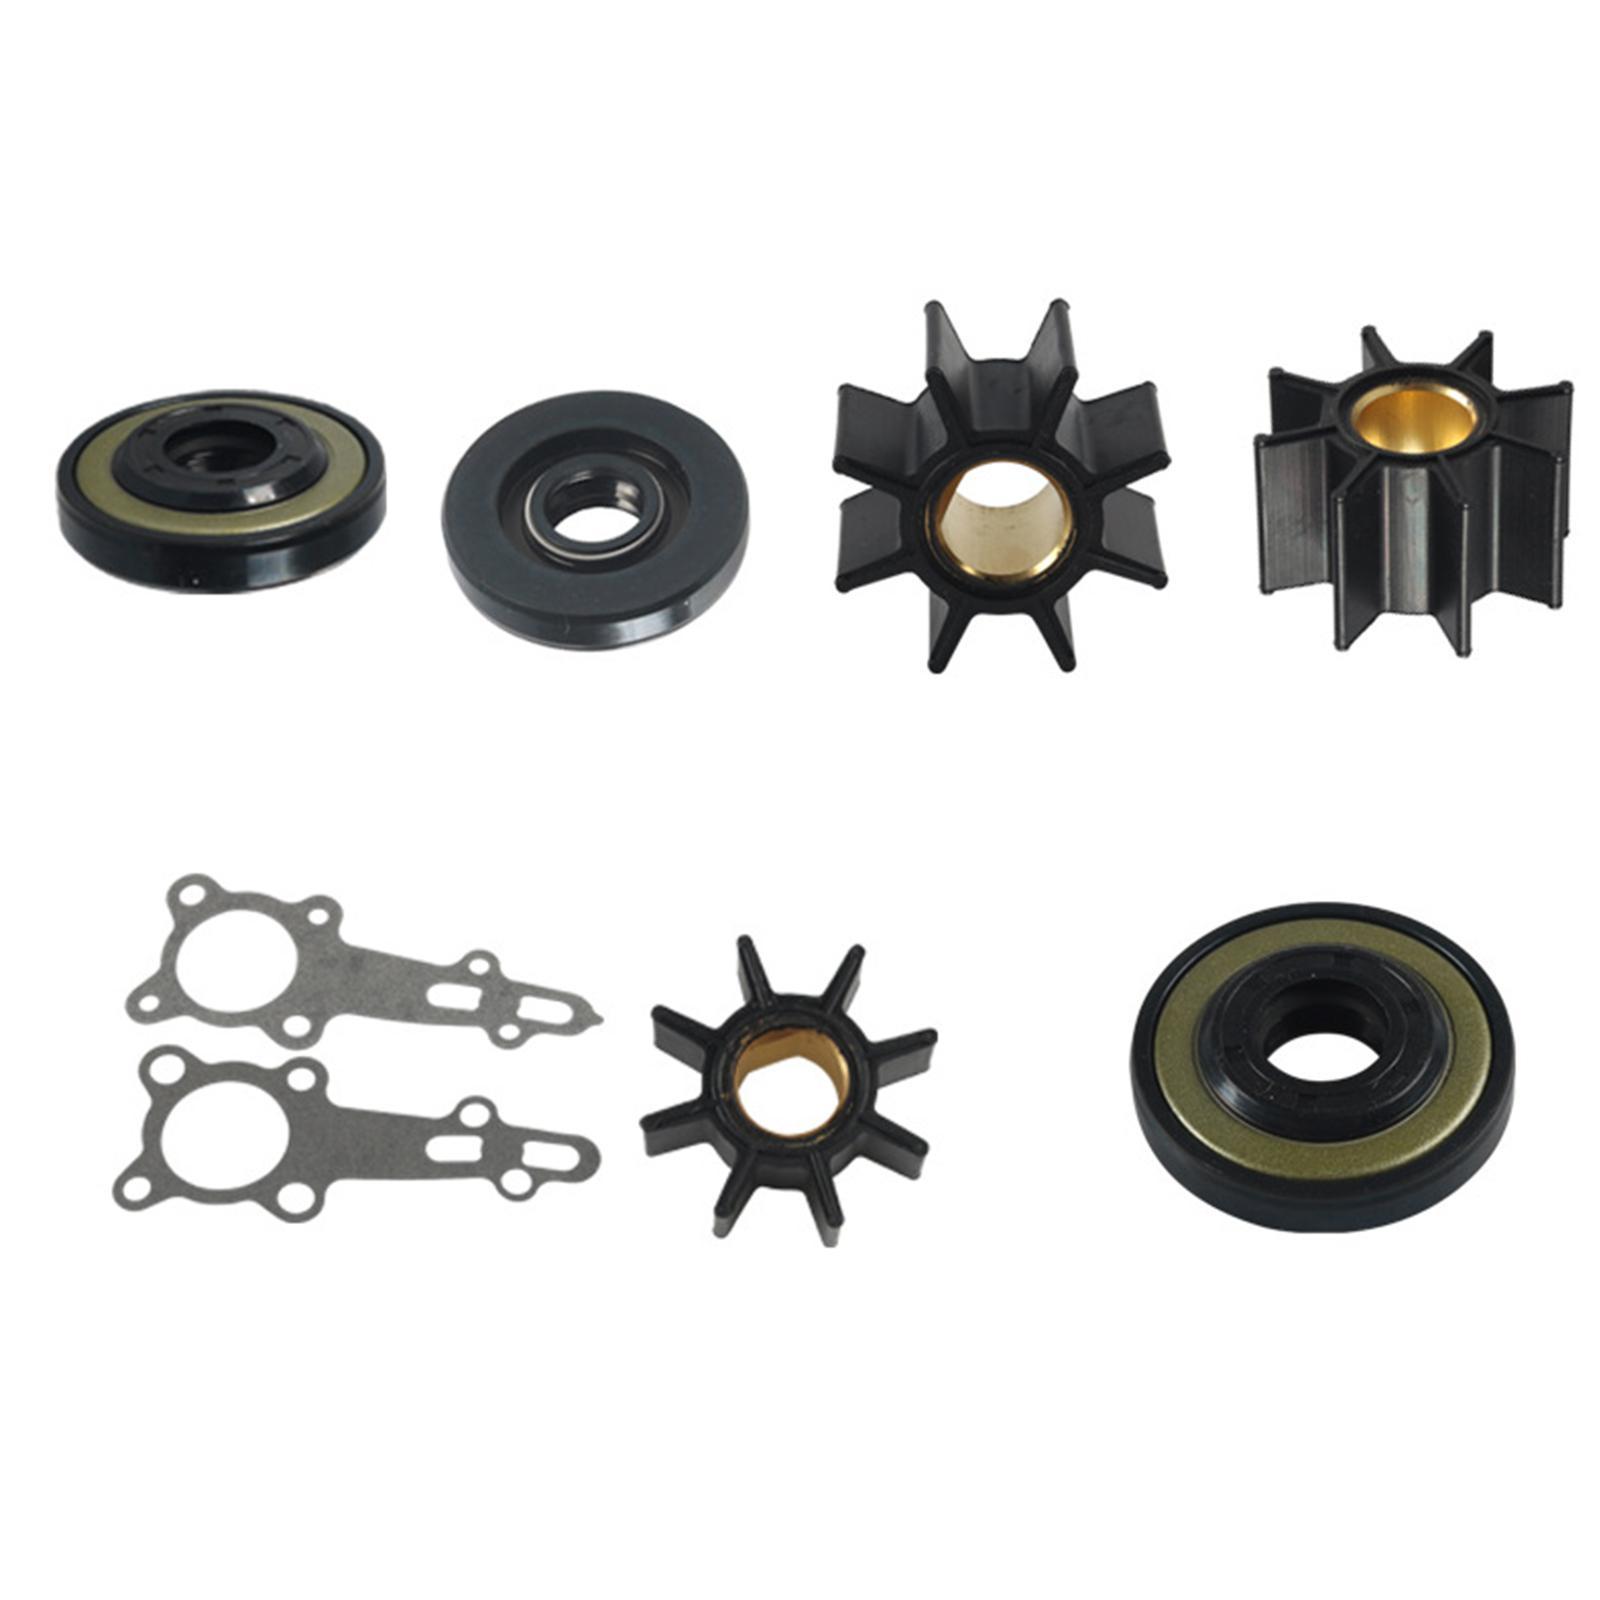 Water Pump Impeller Service  Parts 06192-881-c00 Durable Easily Install Stable Performance Marine Outboard Accessories for 7.5HP 8HP